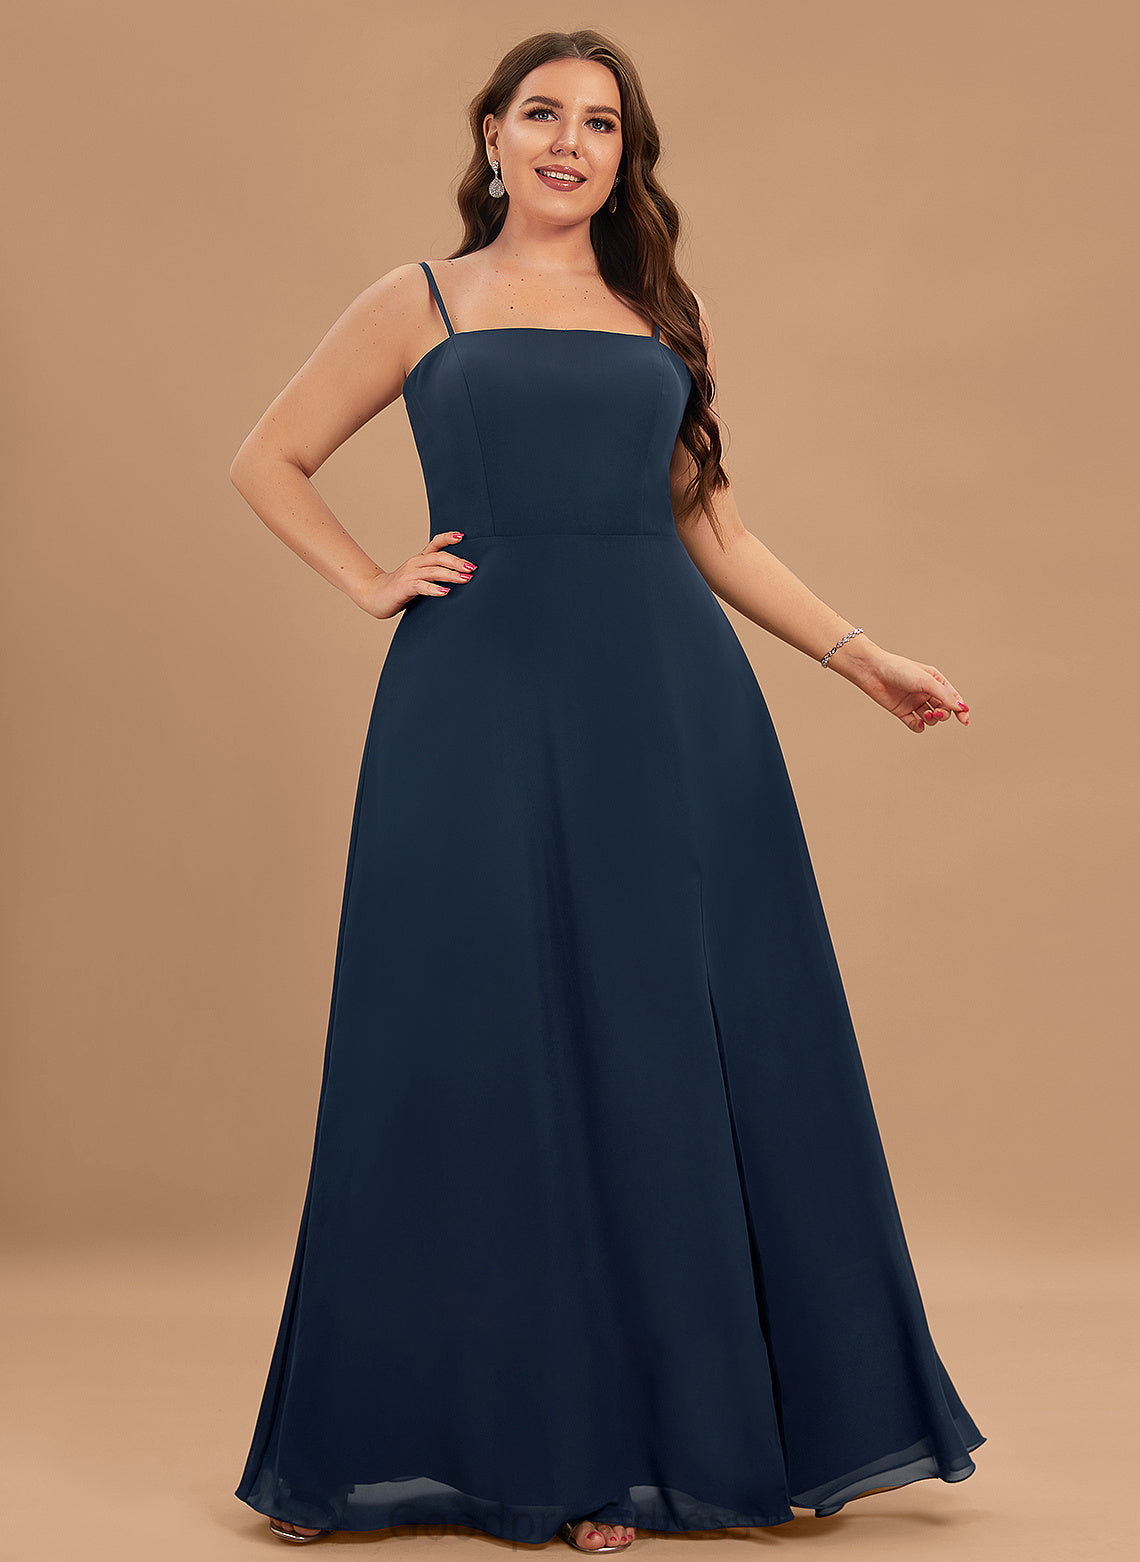 Laylah Prom Dresses Neckline Floor-Length A-Line With Square Split Chiffon Front